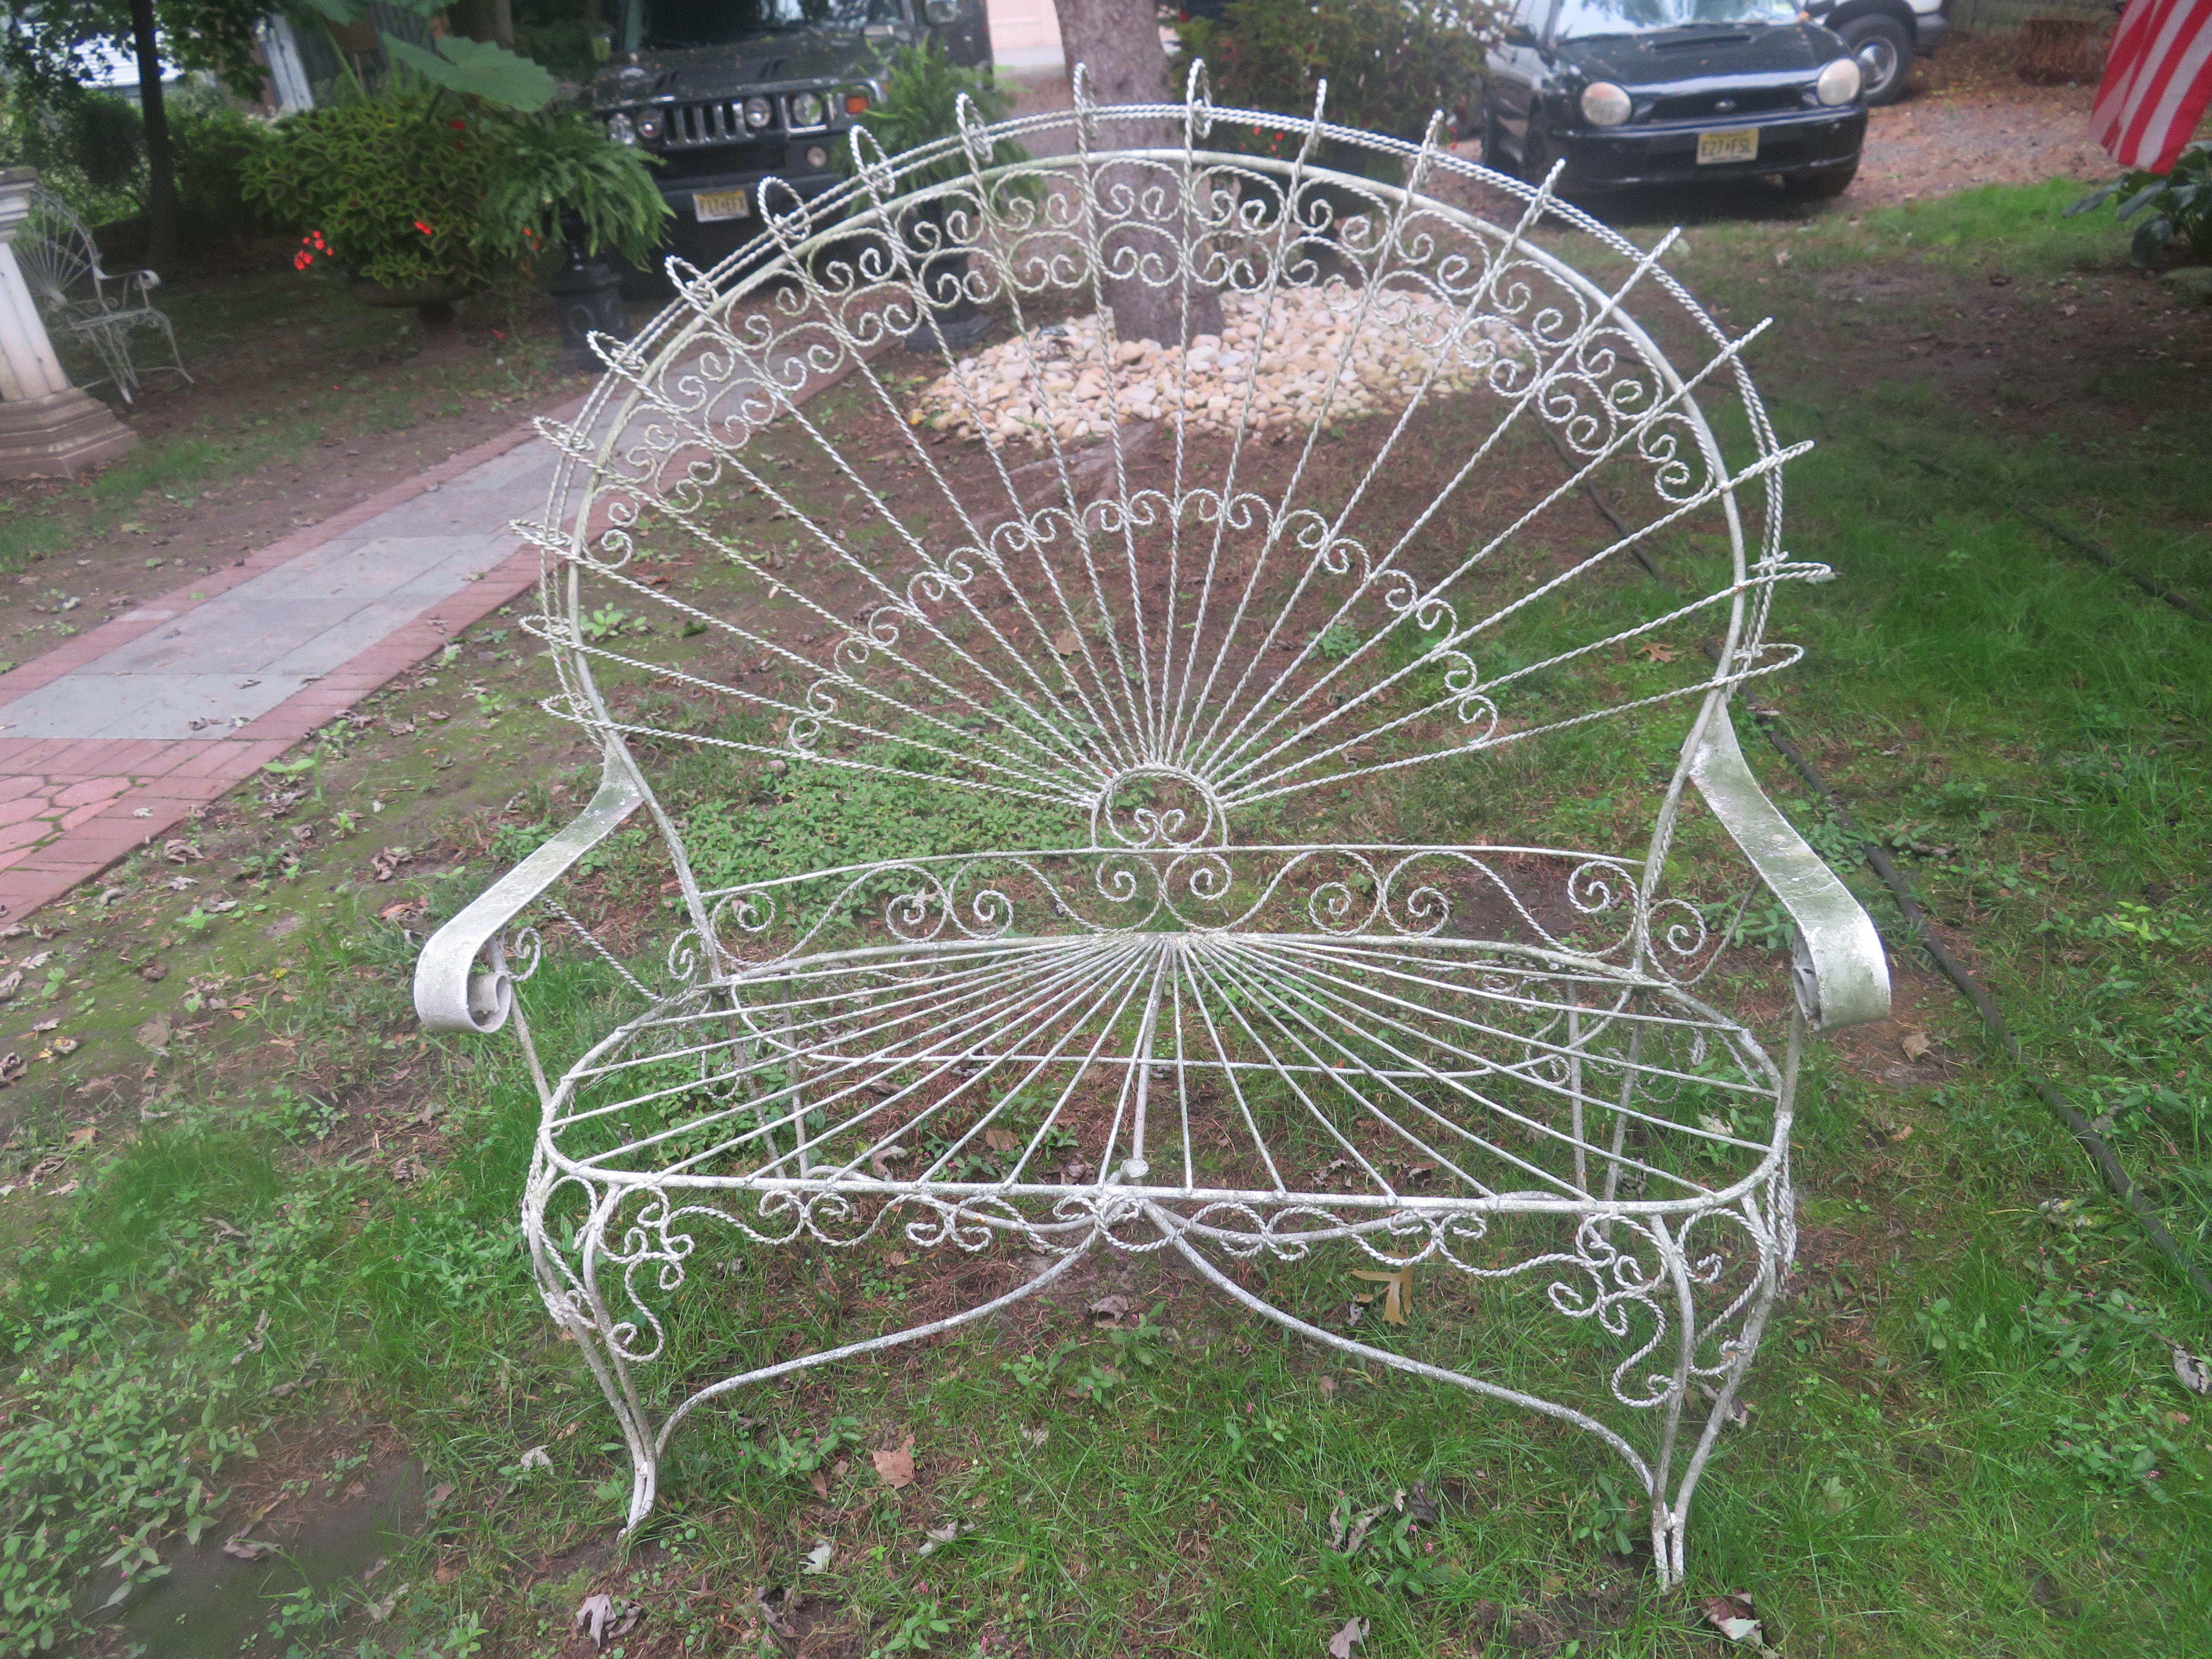 Gorgeous Salterini style ornate wrought iron twisted wire fan back patio bench. This piece is in vintage condition retaining it's original white finish with a lovely green lichen patina. There are no cracks or breaks to the frame-sturdy. Please not